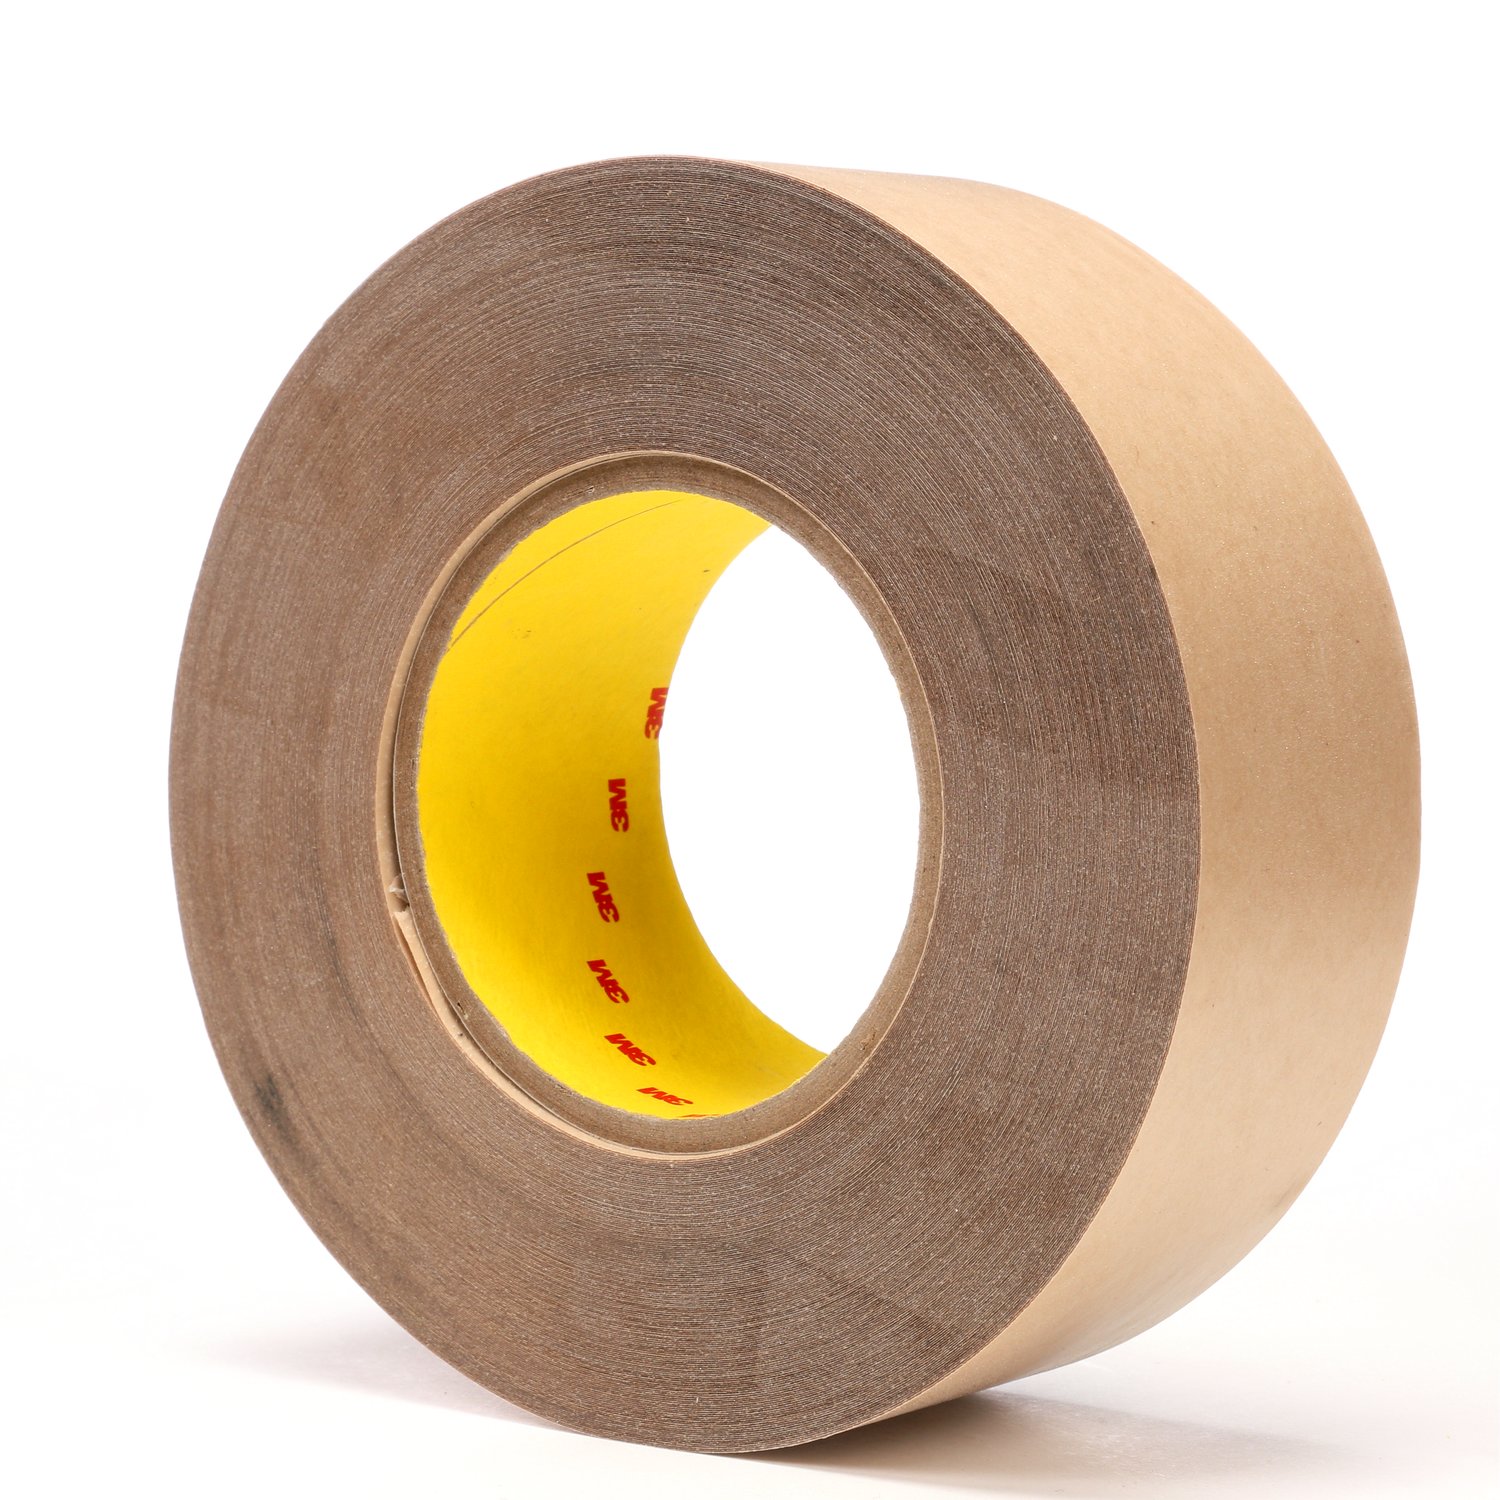 7000123391 - 3M Adhesive Transfer Tape 9485PC, Clear, 2 in x 60 yd, 5 mil, 24 rolls
per case